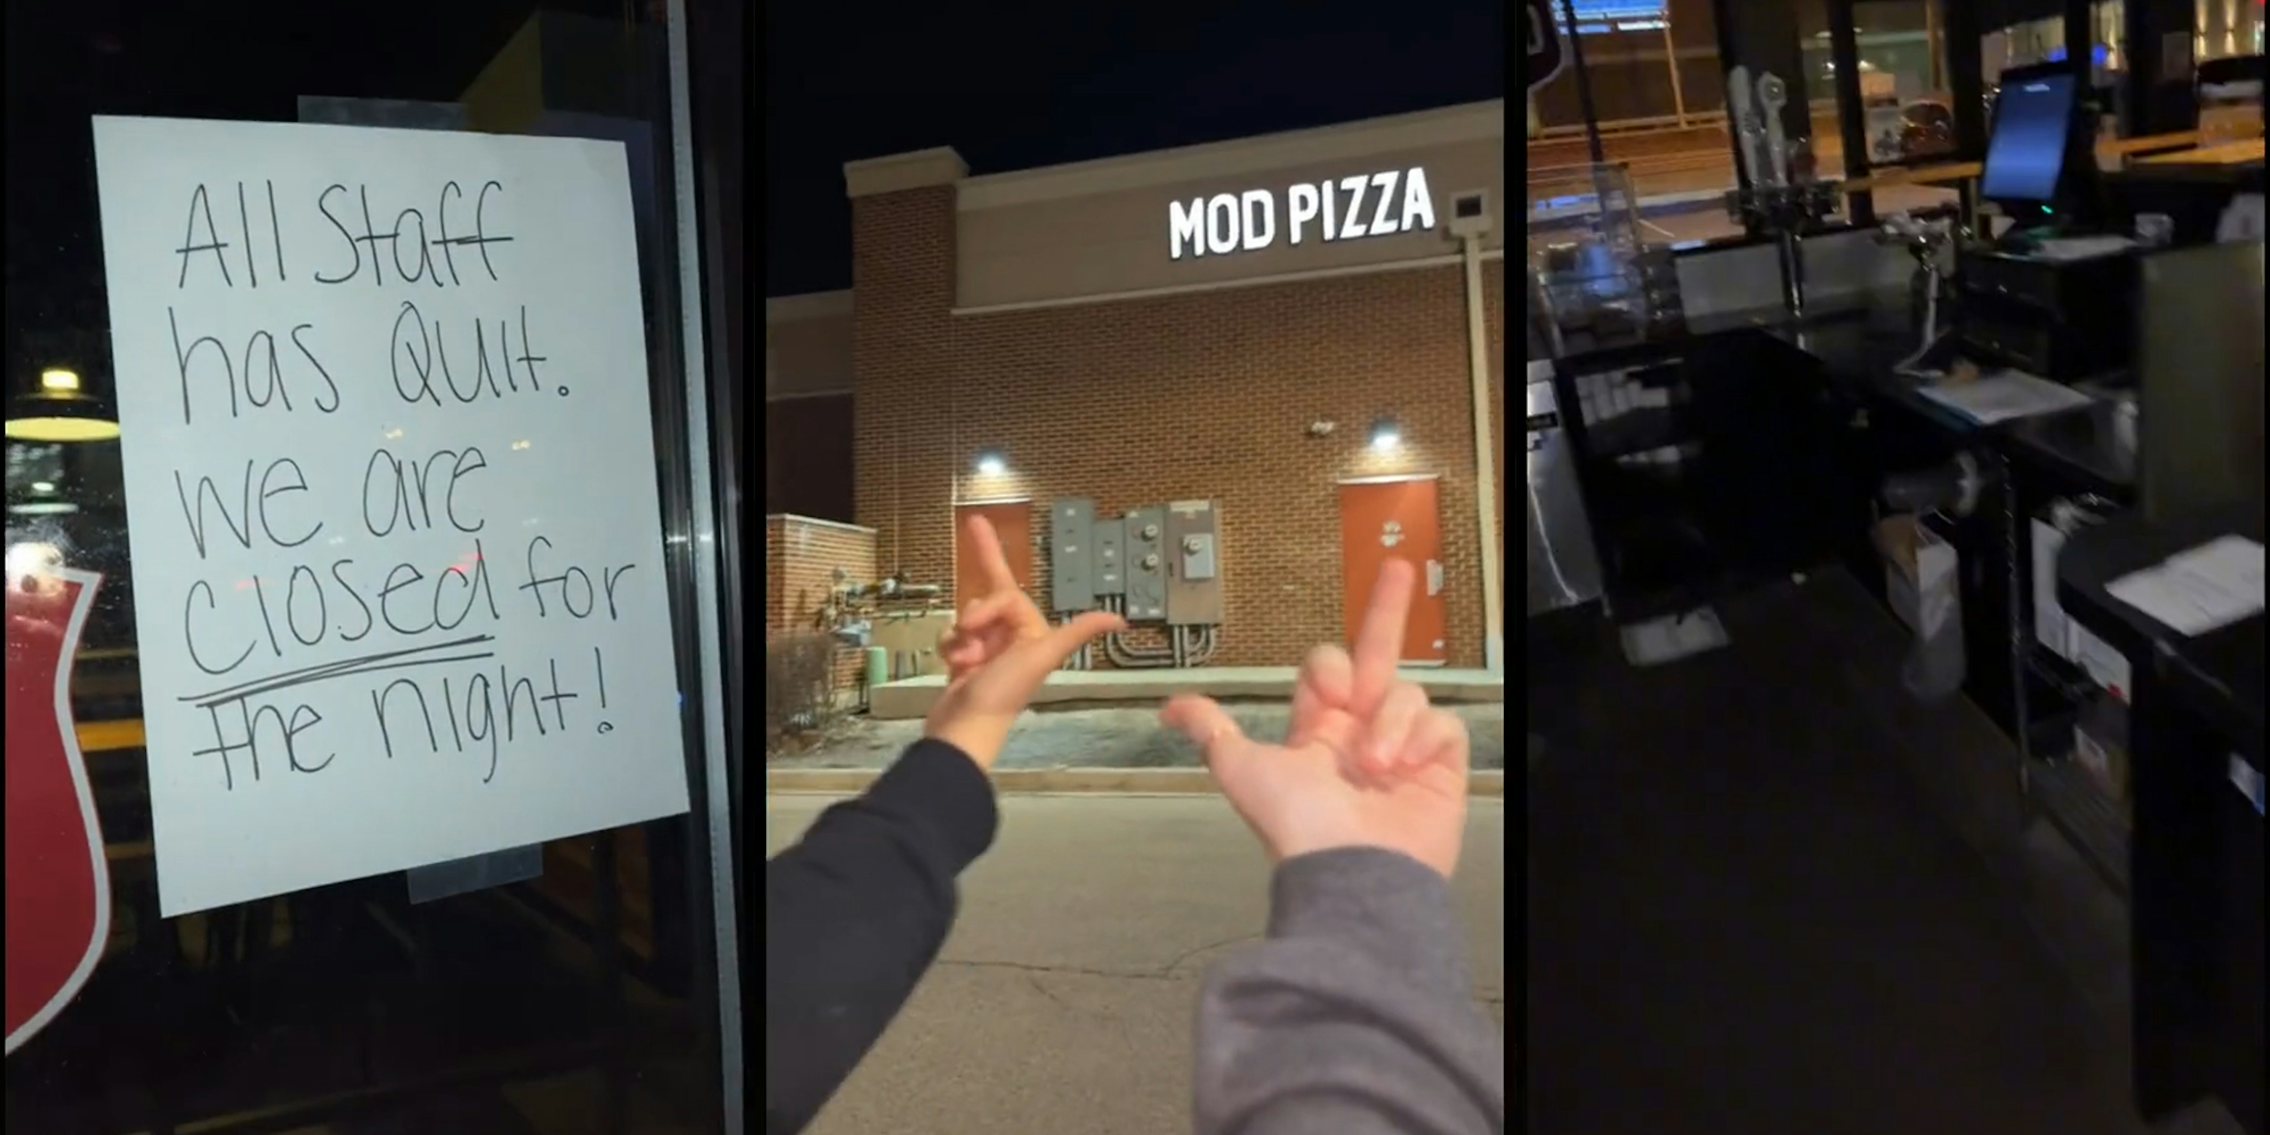 window sign that reads 'All staff has quit. we are closed for the night!' (l) two people giving the finger to Mod Pizza sign (c) empty interior of restaurant (r)